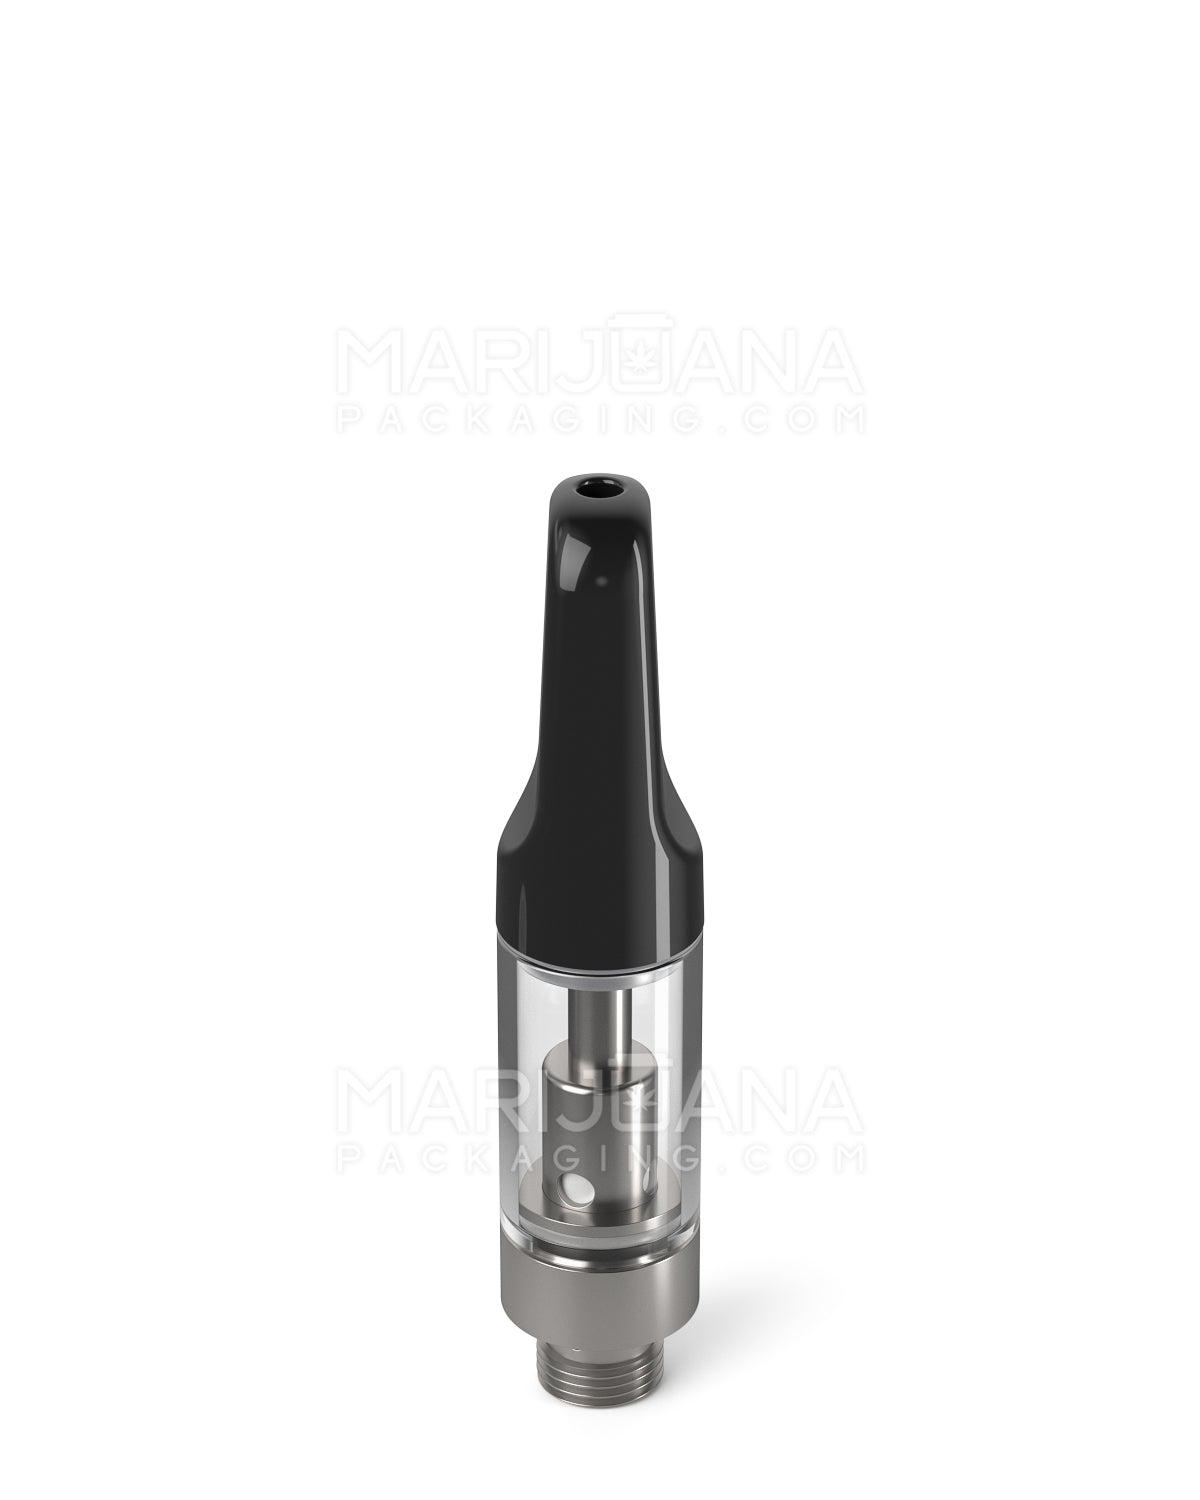 CCELL | Liquid6 Reactor Glass Vape Cartridge with Black Ceramic Mouthpiece | 0.5mL - Screw On - 100 Count - 4